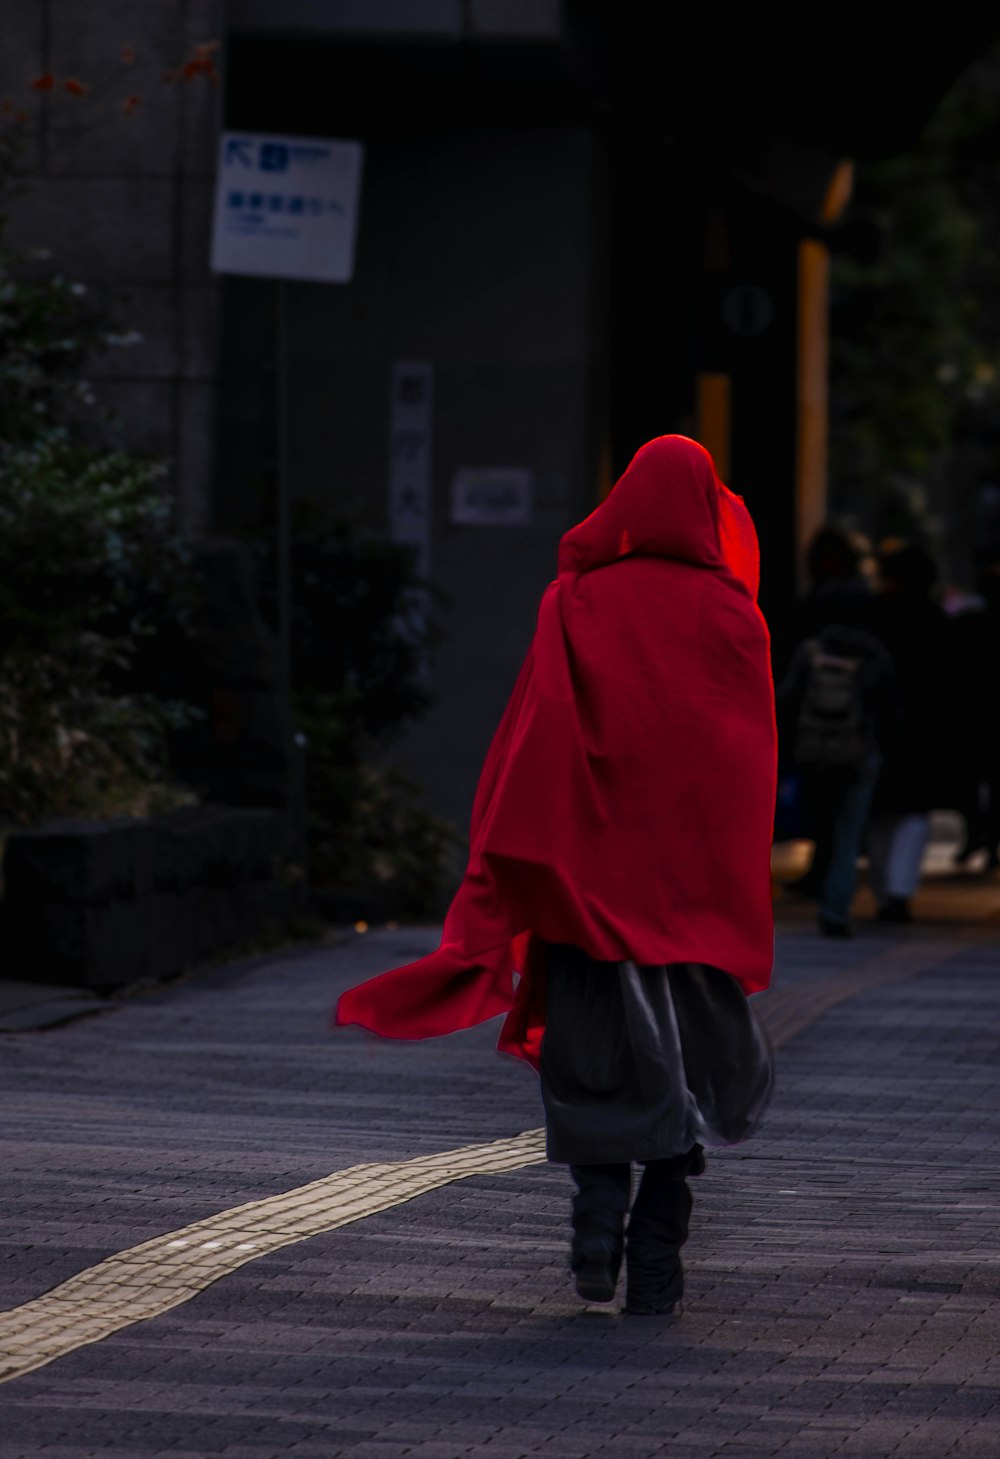 a person in a red cloak walking down a street